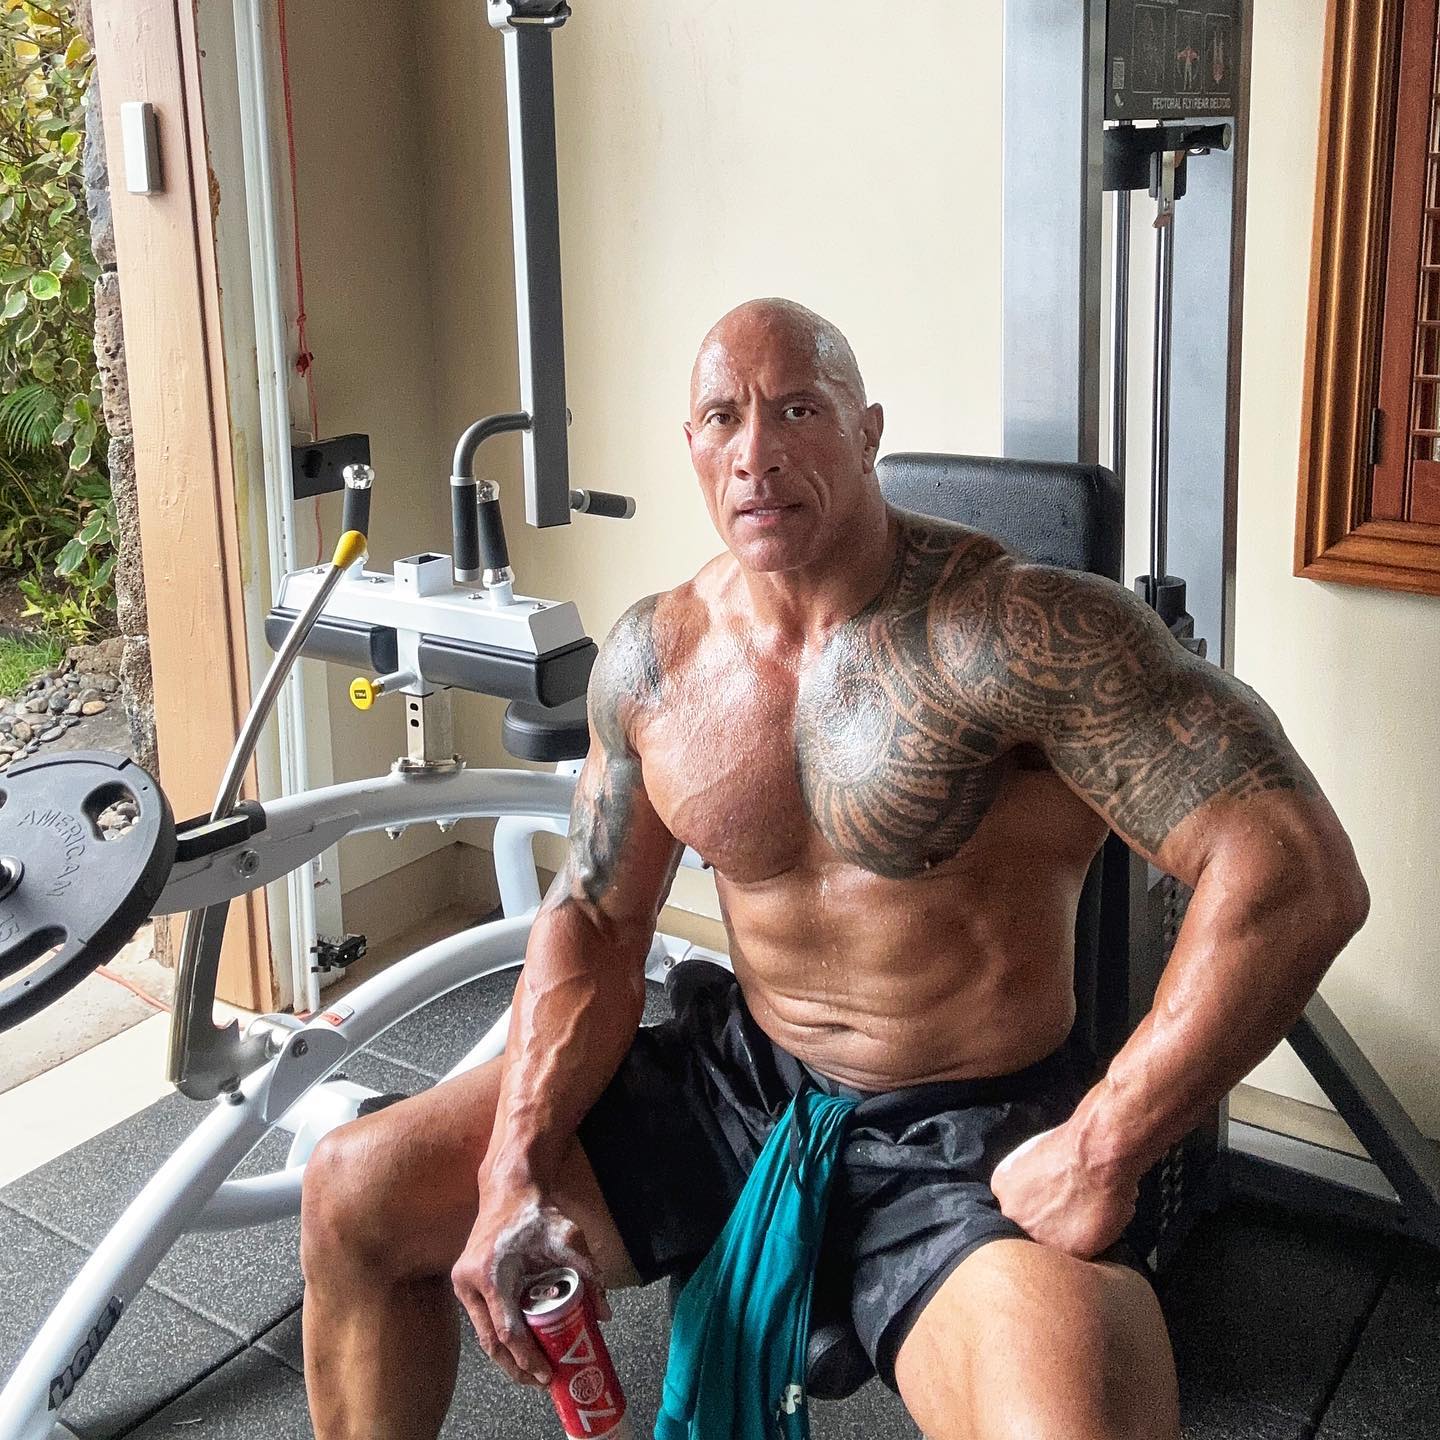 A shirtless Dwayne Johnson in his home gym in black shorts holding a can of ZOA energy drink